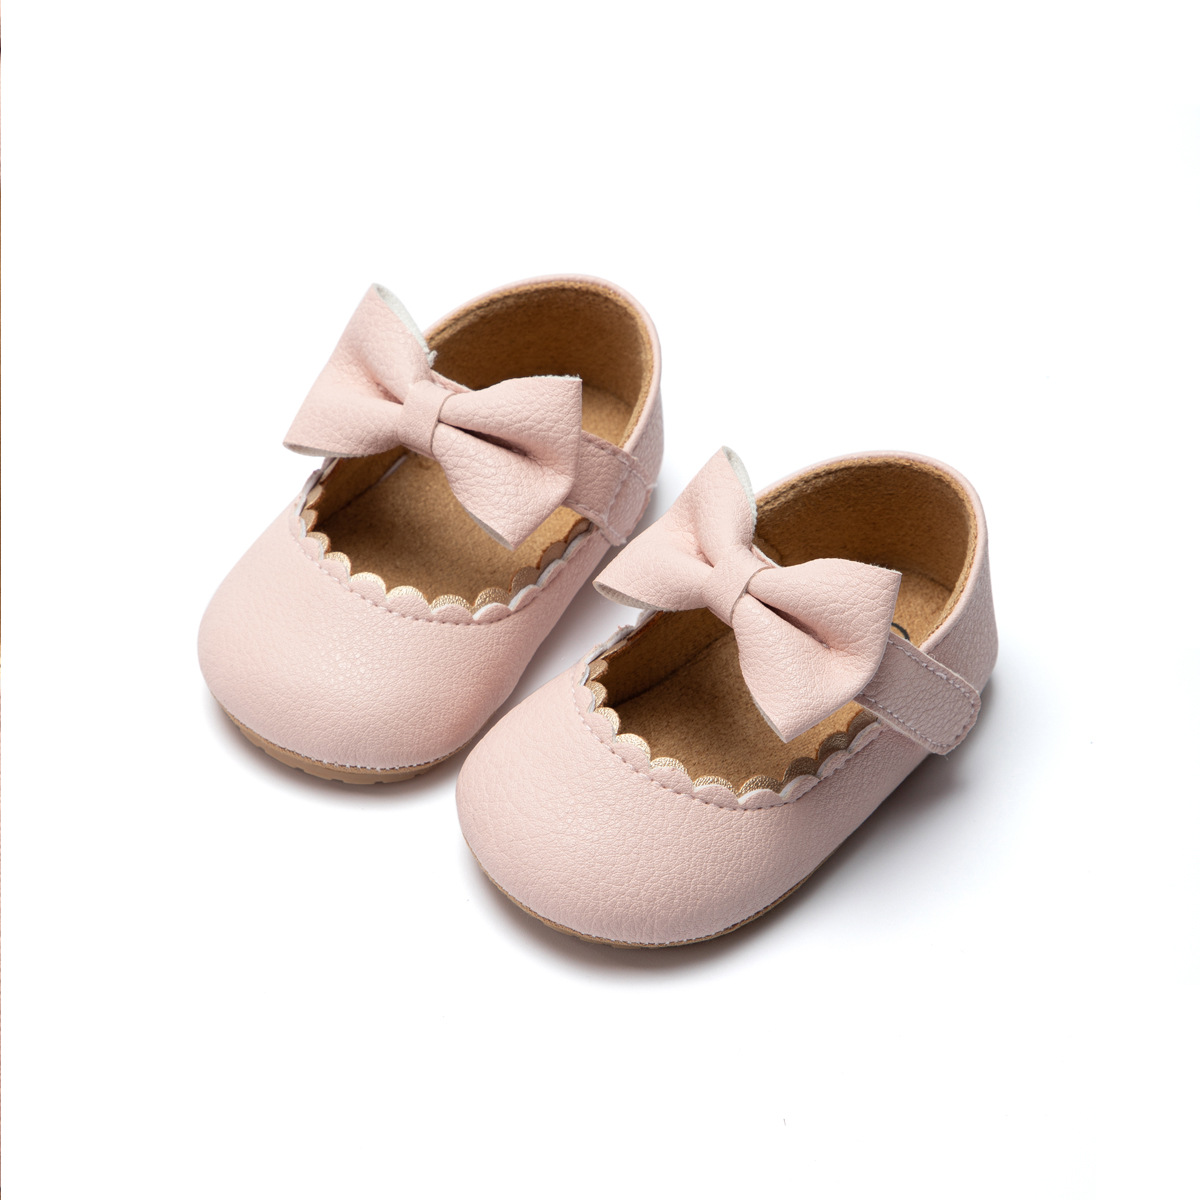 Foreign Trade Popular Baby Shoes Bow Princess Shoes Rubber Sole Non-Slip Baby Shoes Toddler Shoes Children's Shoes Baby Shoes